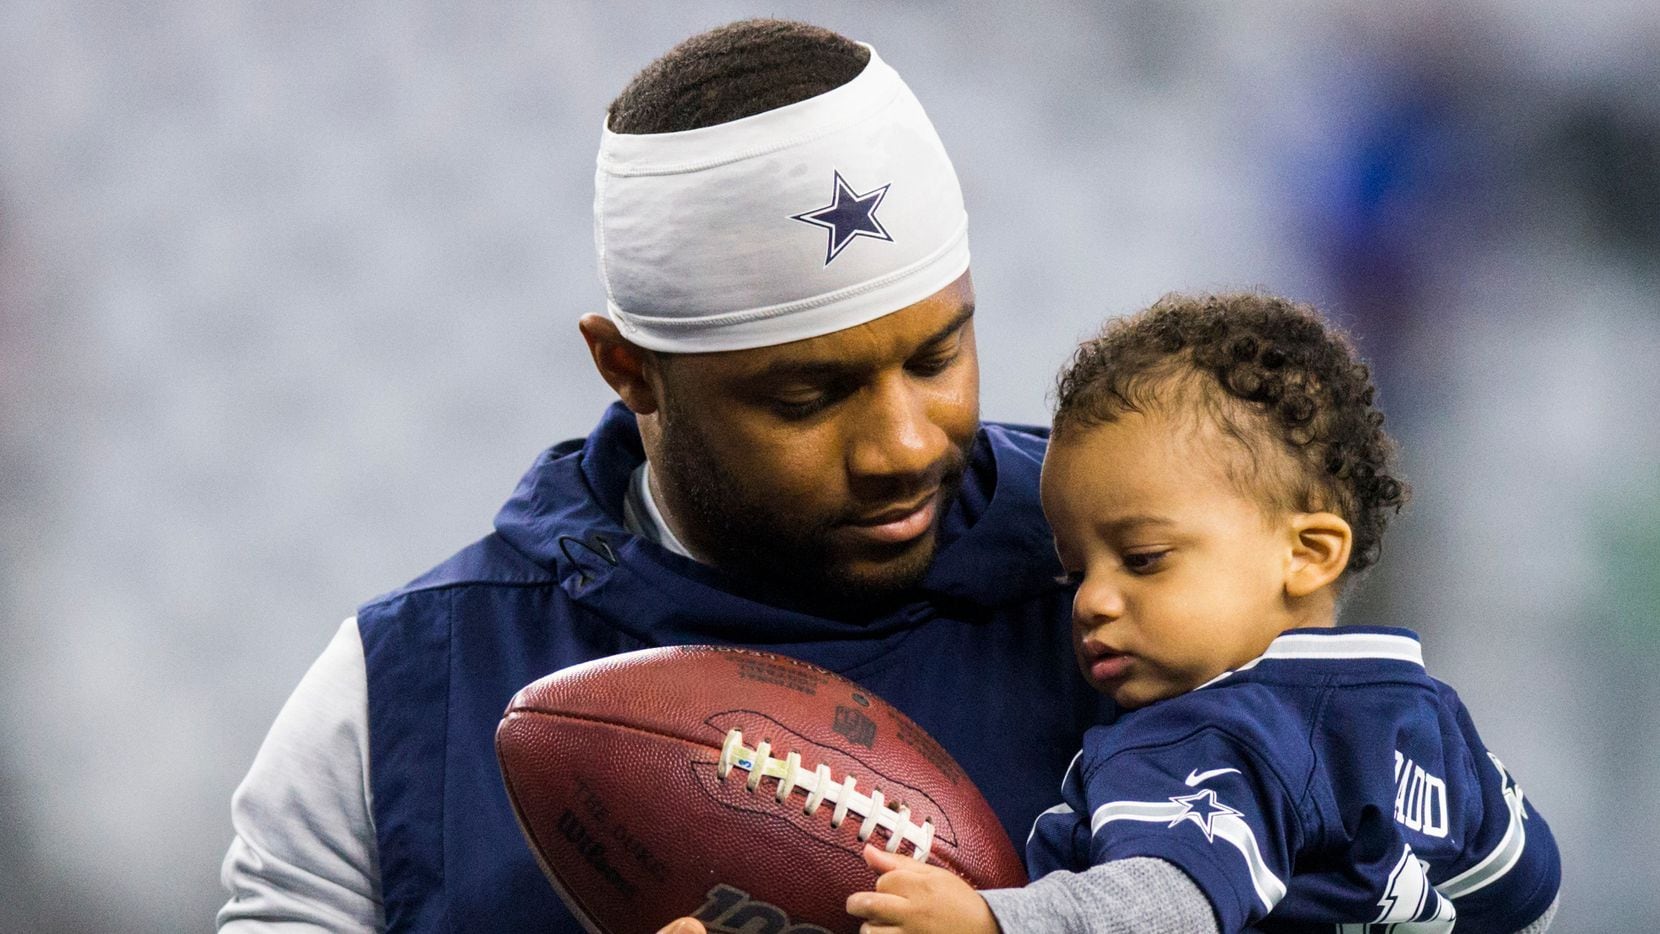 Dallas Cowboys wide receiver Randall Cobb (18) hands a football to his son, Caspian Cyrus Cobb, during warmups before an NFL game between the Dallas Cowboys and the Washington Redskins on Sunday, December 29, 2019 at AT&T Stadium in Arlington, Texas.